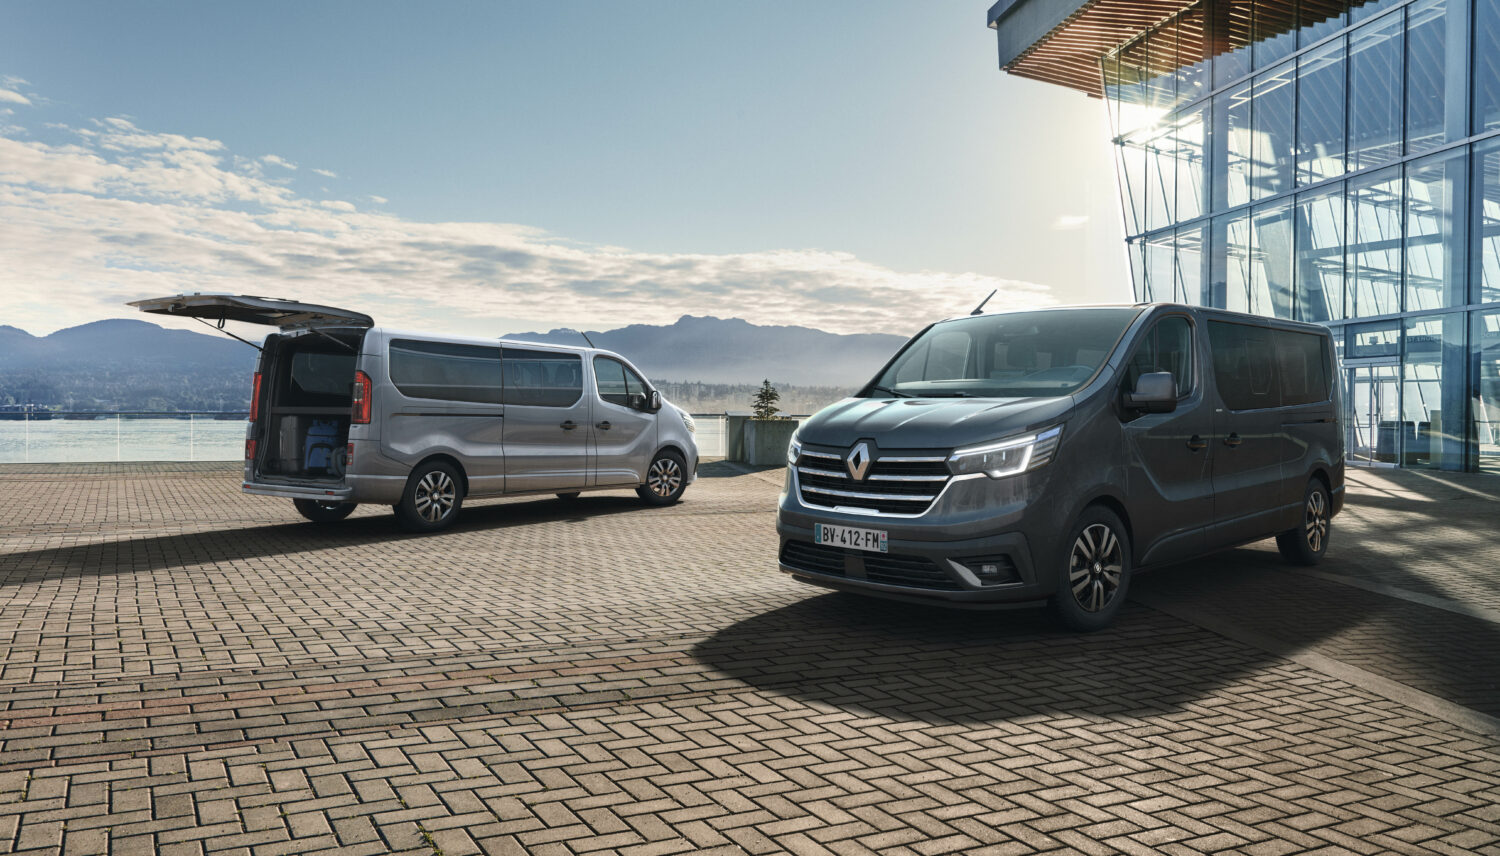 2021 - New Renault Trafic Spaceclass on location..jpeg